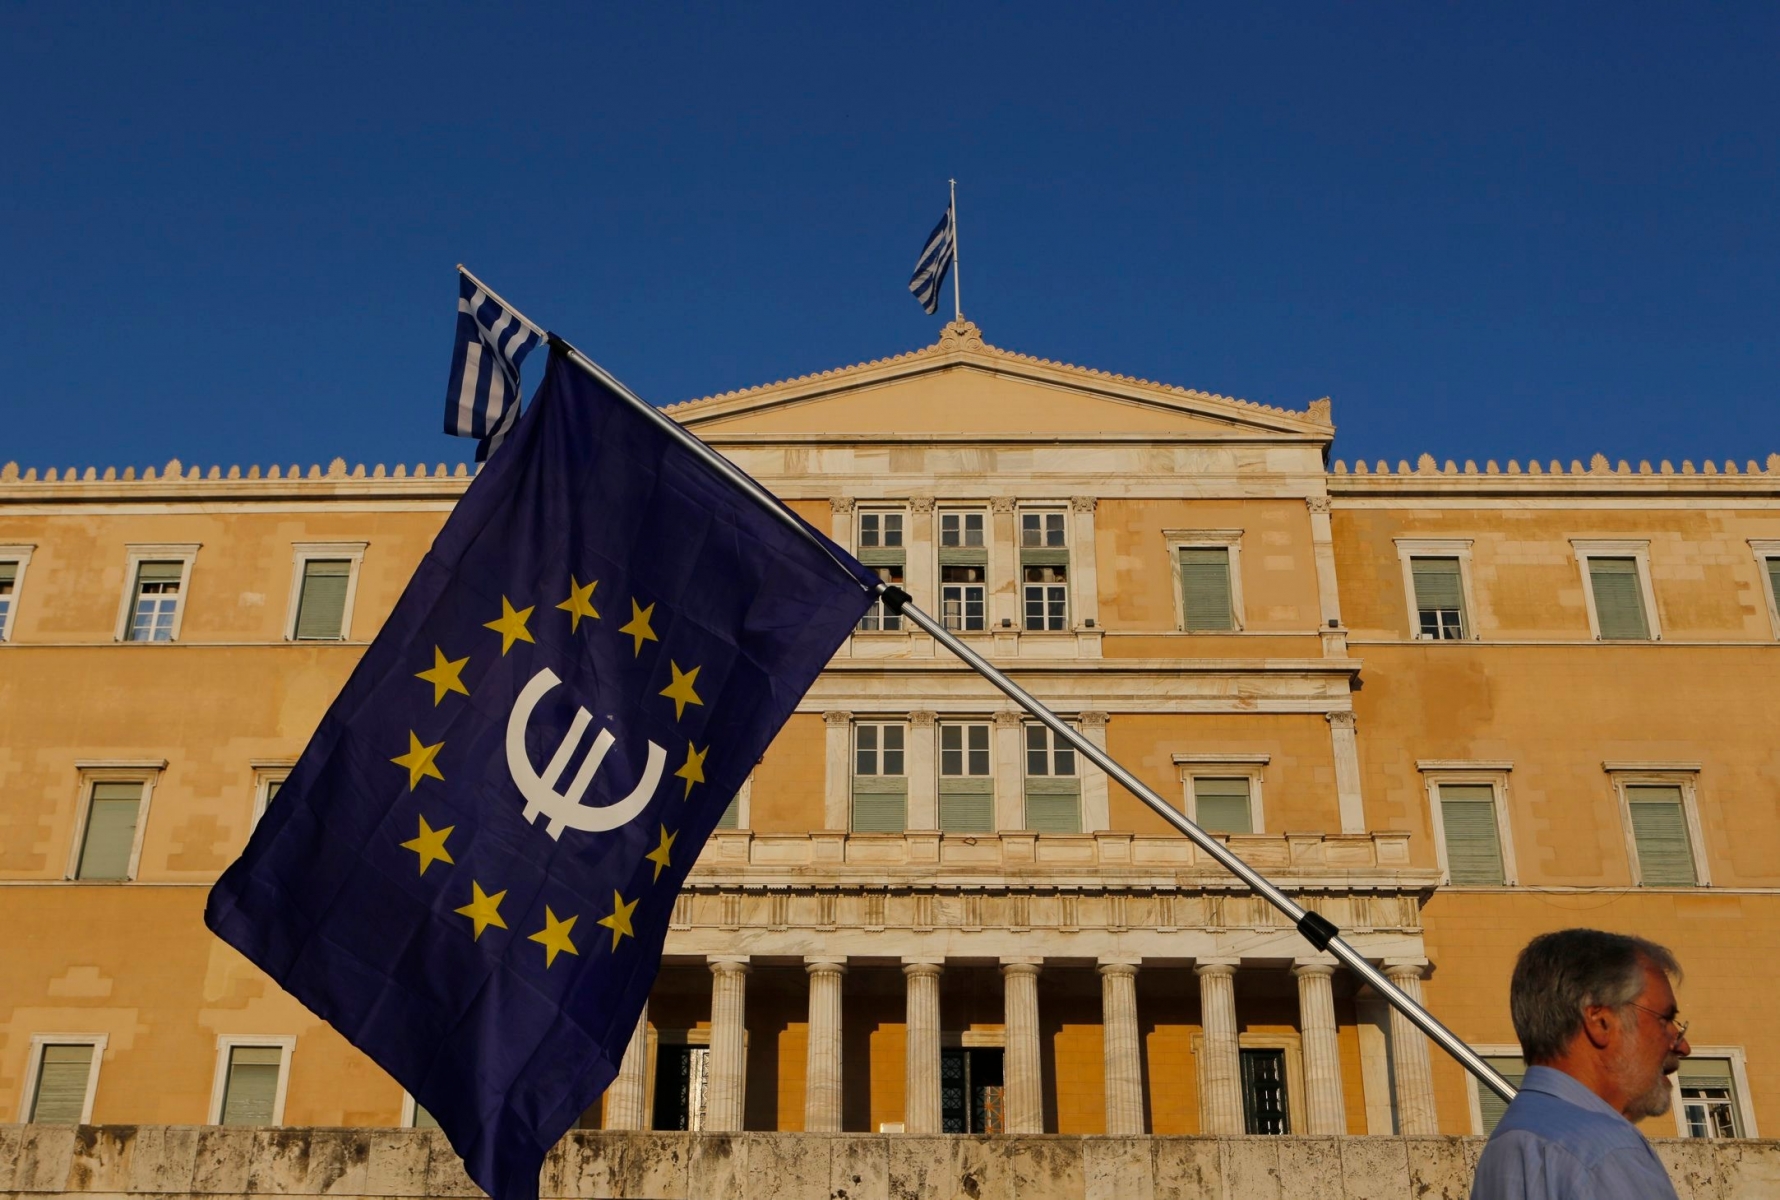 A pro-Euro demonstrator holds a European Union flag in front of Greek Parliament during a rally at Syntagma square in Athens, Thursday, July 9, 2015. Hopes that Greece can get a rescue deal that will prevent a catastrophic exit from the euro rose on Thursday, after key creditors said they were open to discussing how to ease the country's debt load, a long-time sticking point in their talks. (AP Photo/Petros Karadjias) Greece Bailout